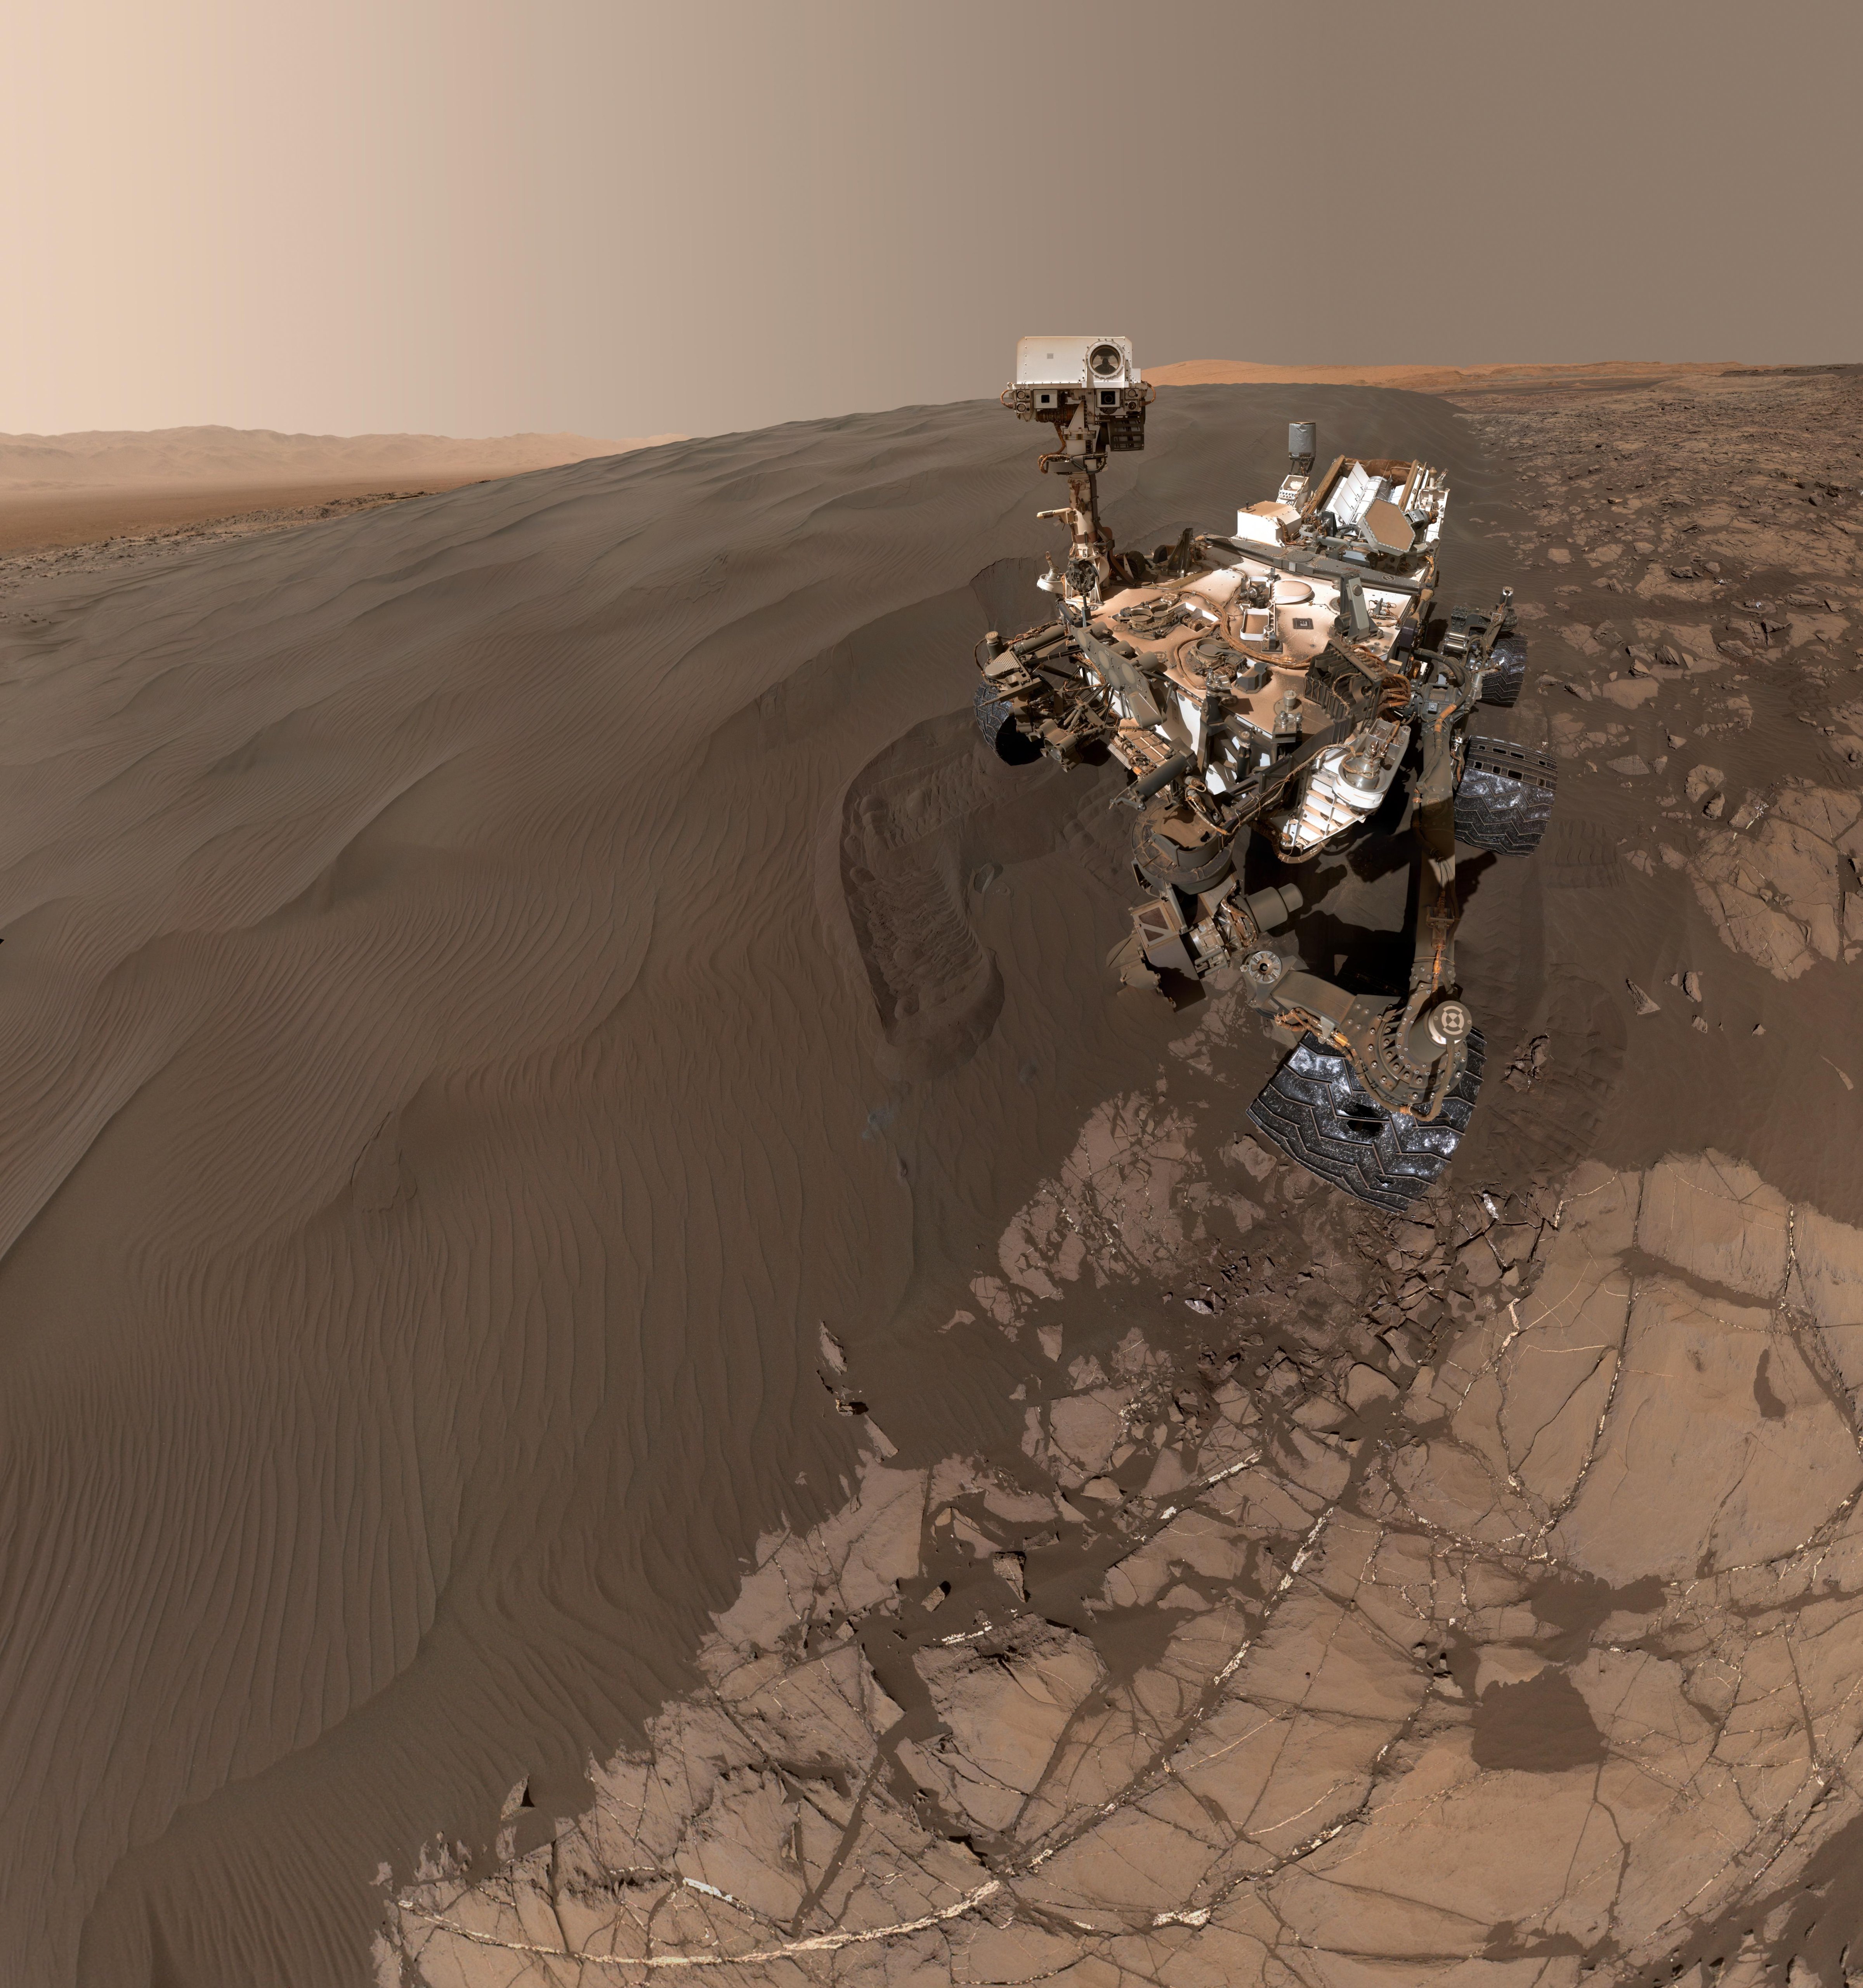 Glamour shot: The Curiosity rover at work on Mars's Bagnold Dune Field, on January 19, 2016 (NASA/JPL)